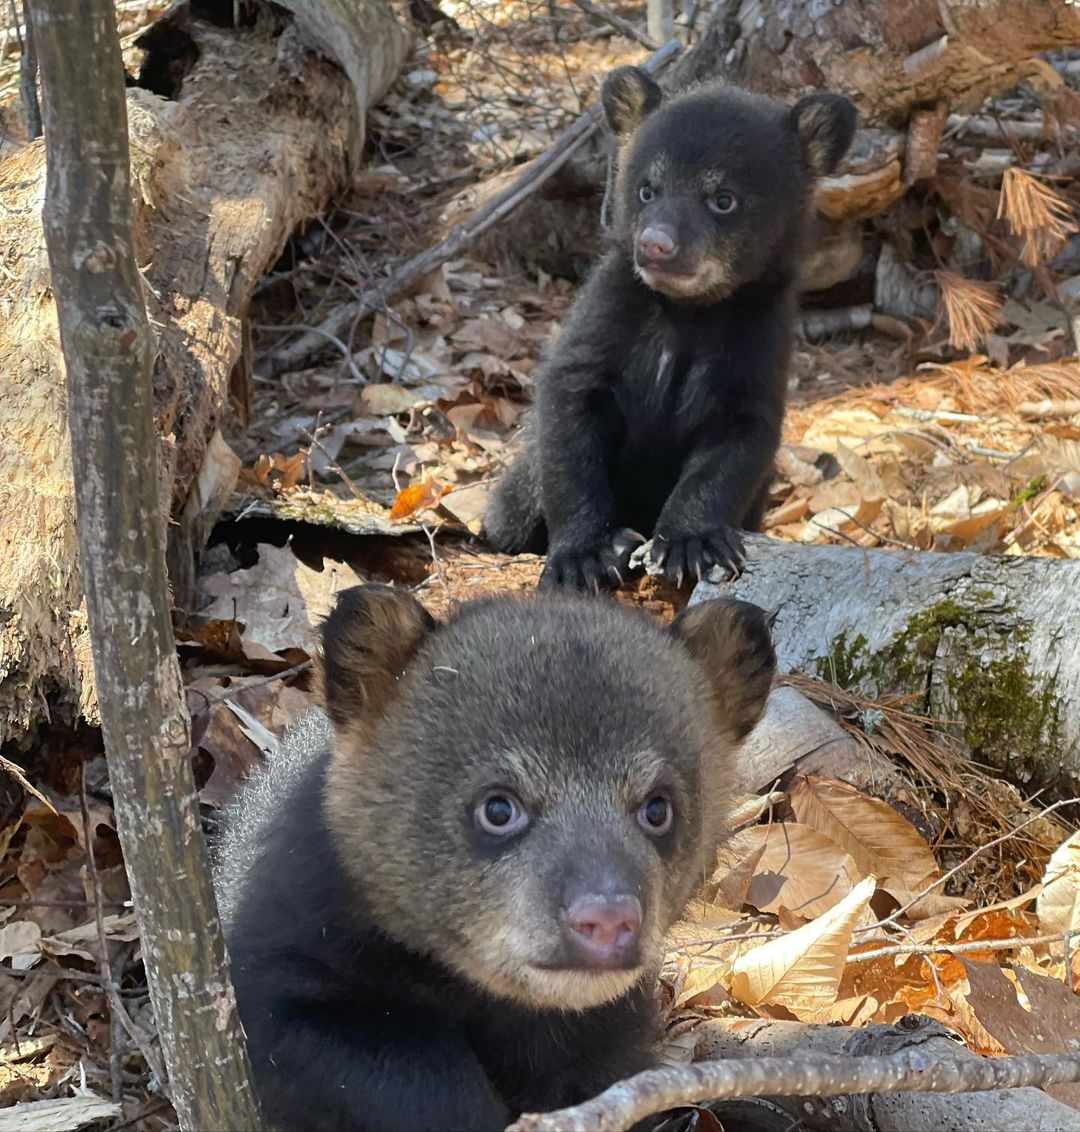 Kilham Bear Center is an animal shelter in New Hampshire, USA, founded by Ben and Ethan Kilham.